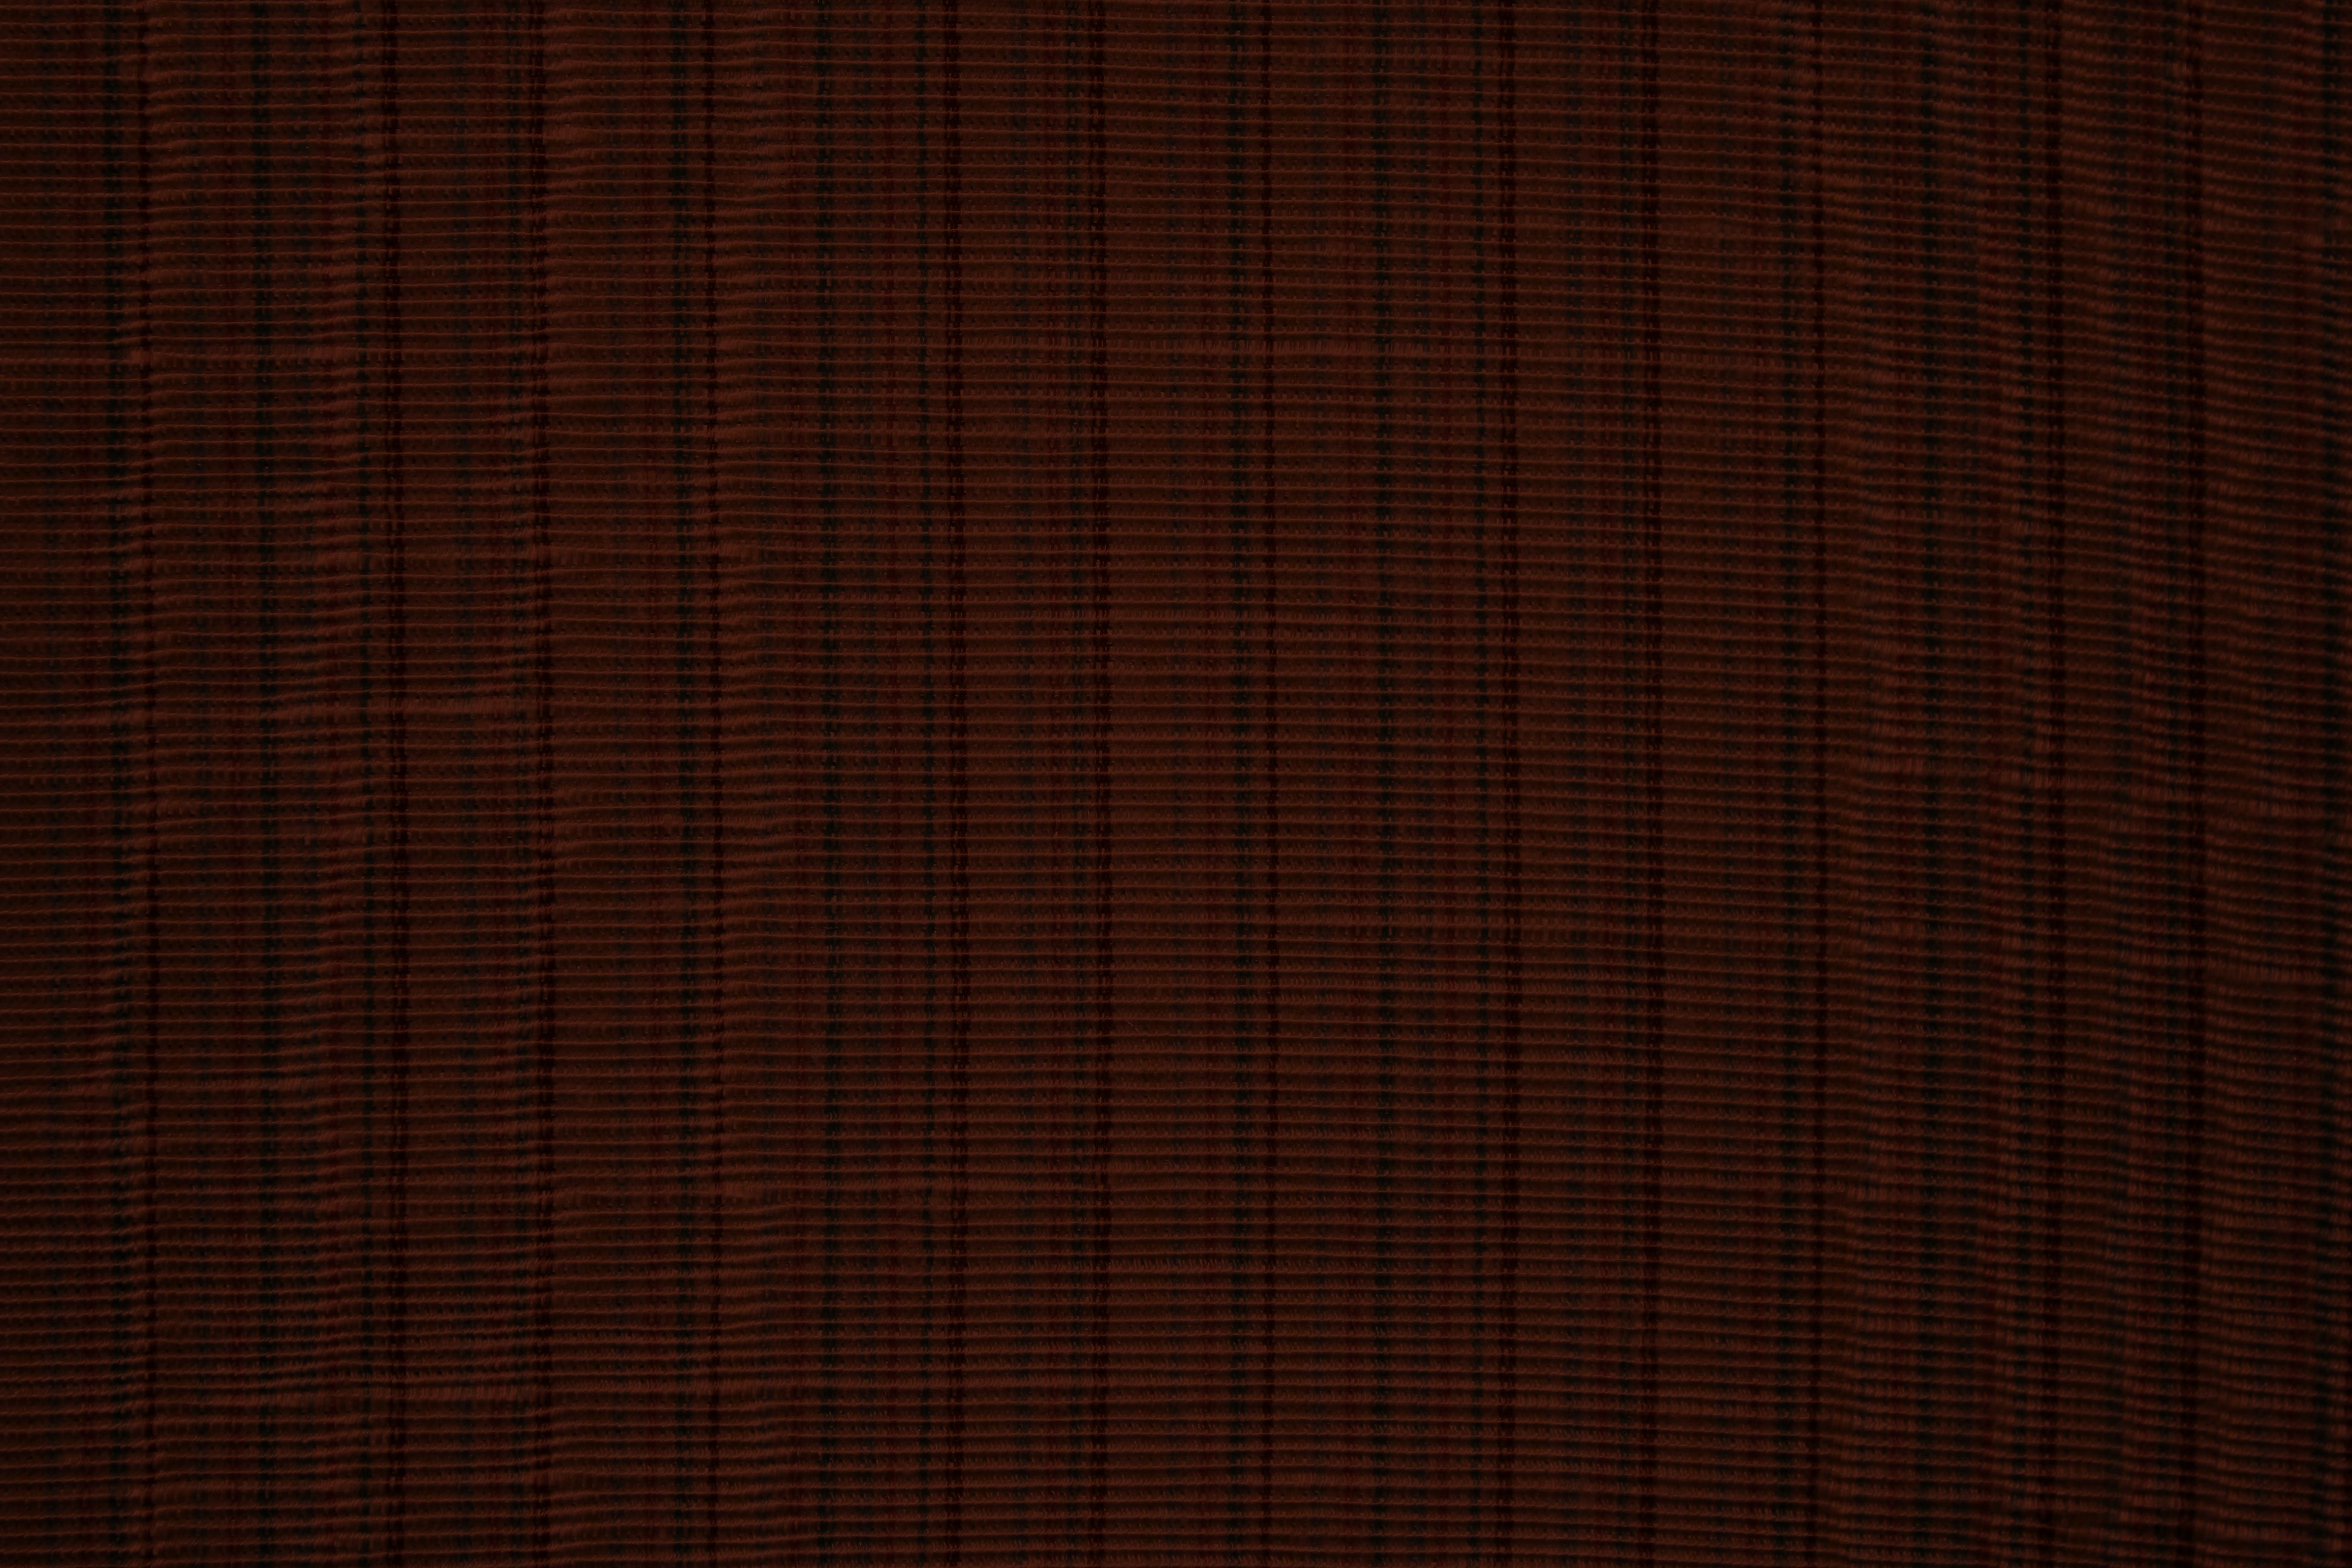 Dark Brown Striped Upholstery Fabric Texture Picture Photograph